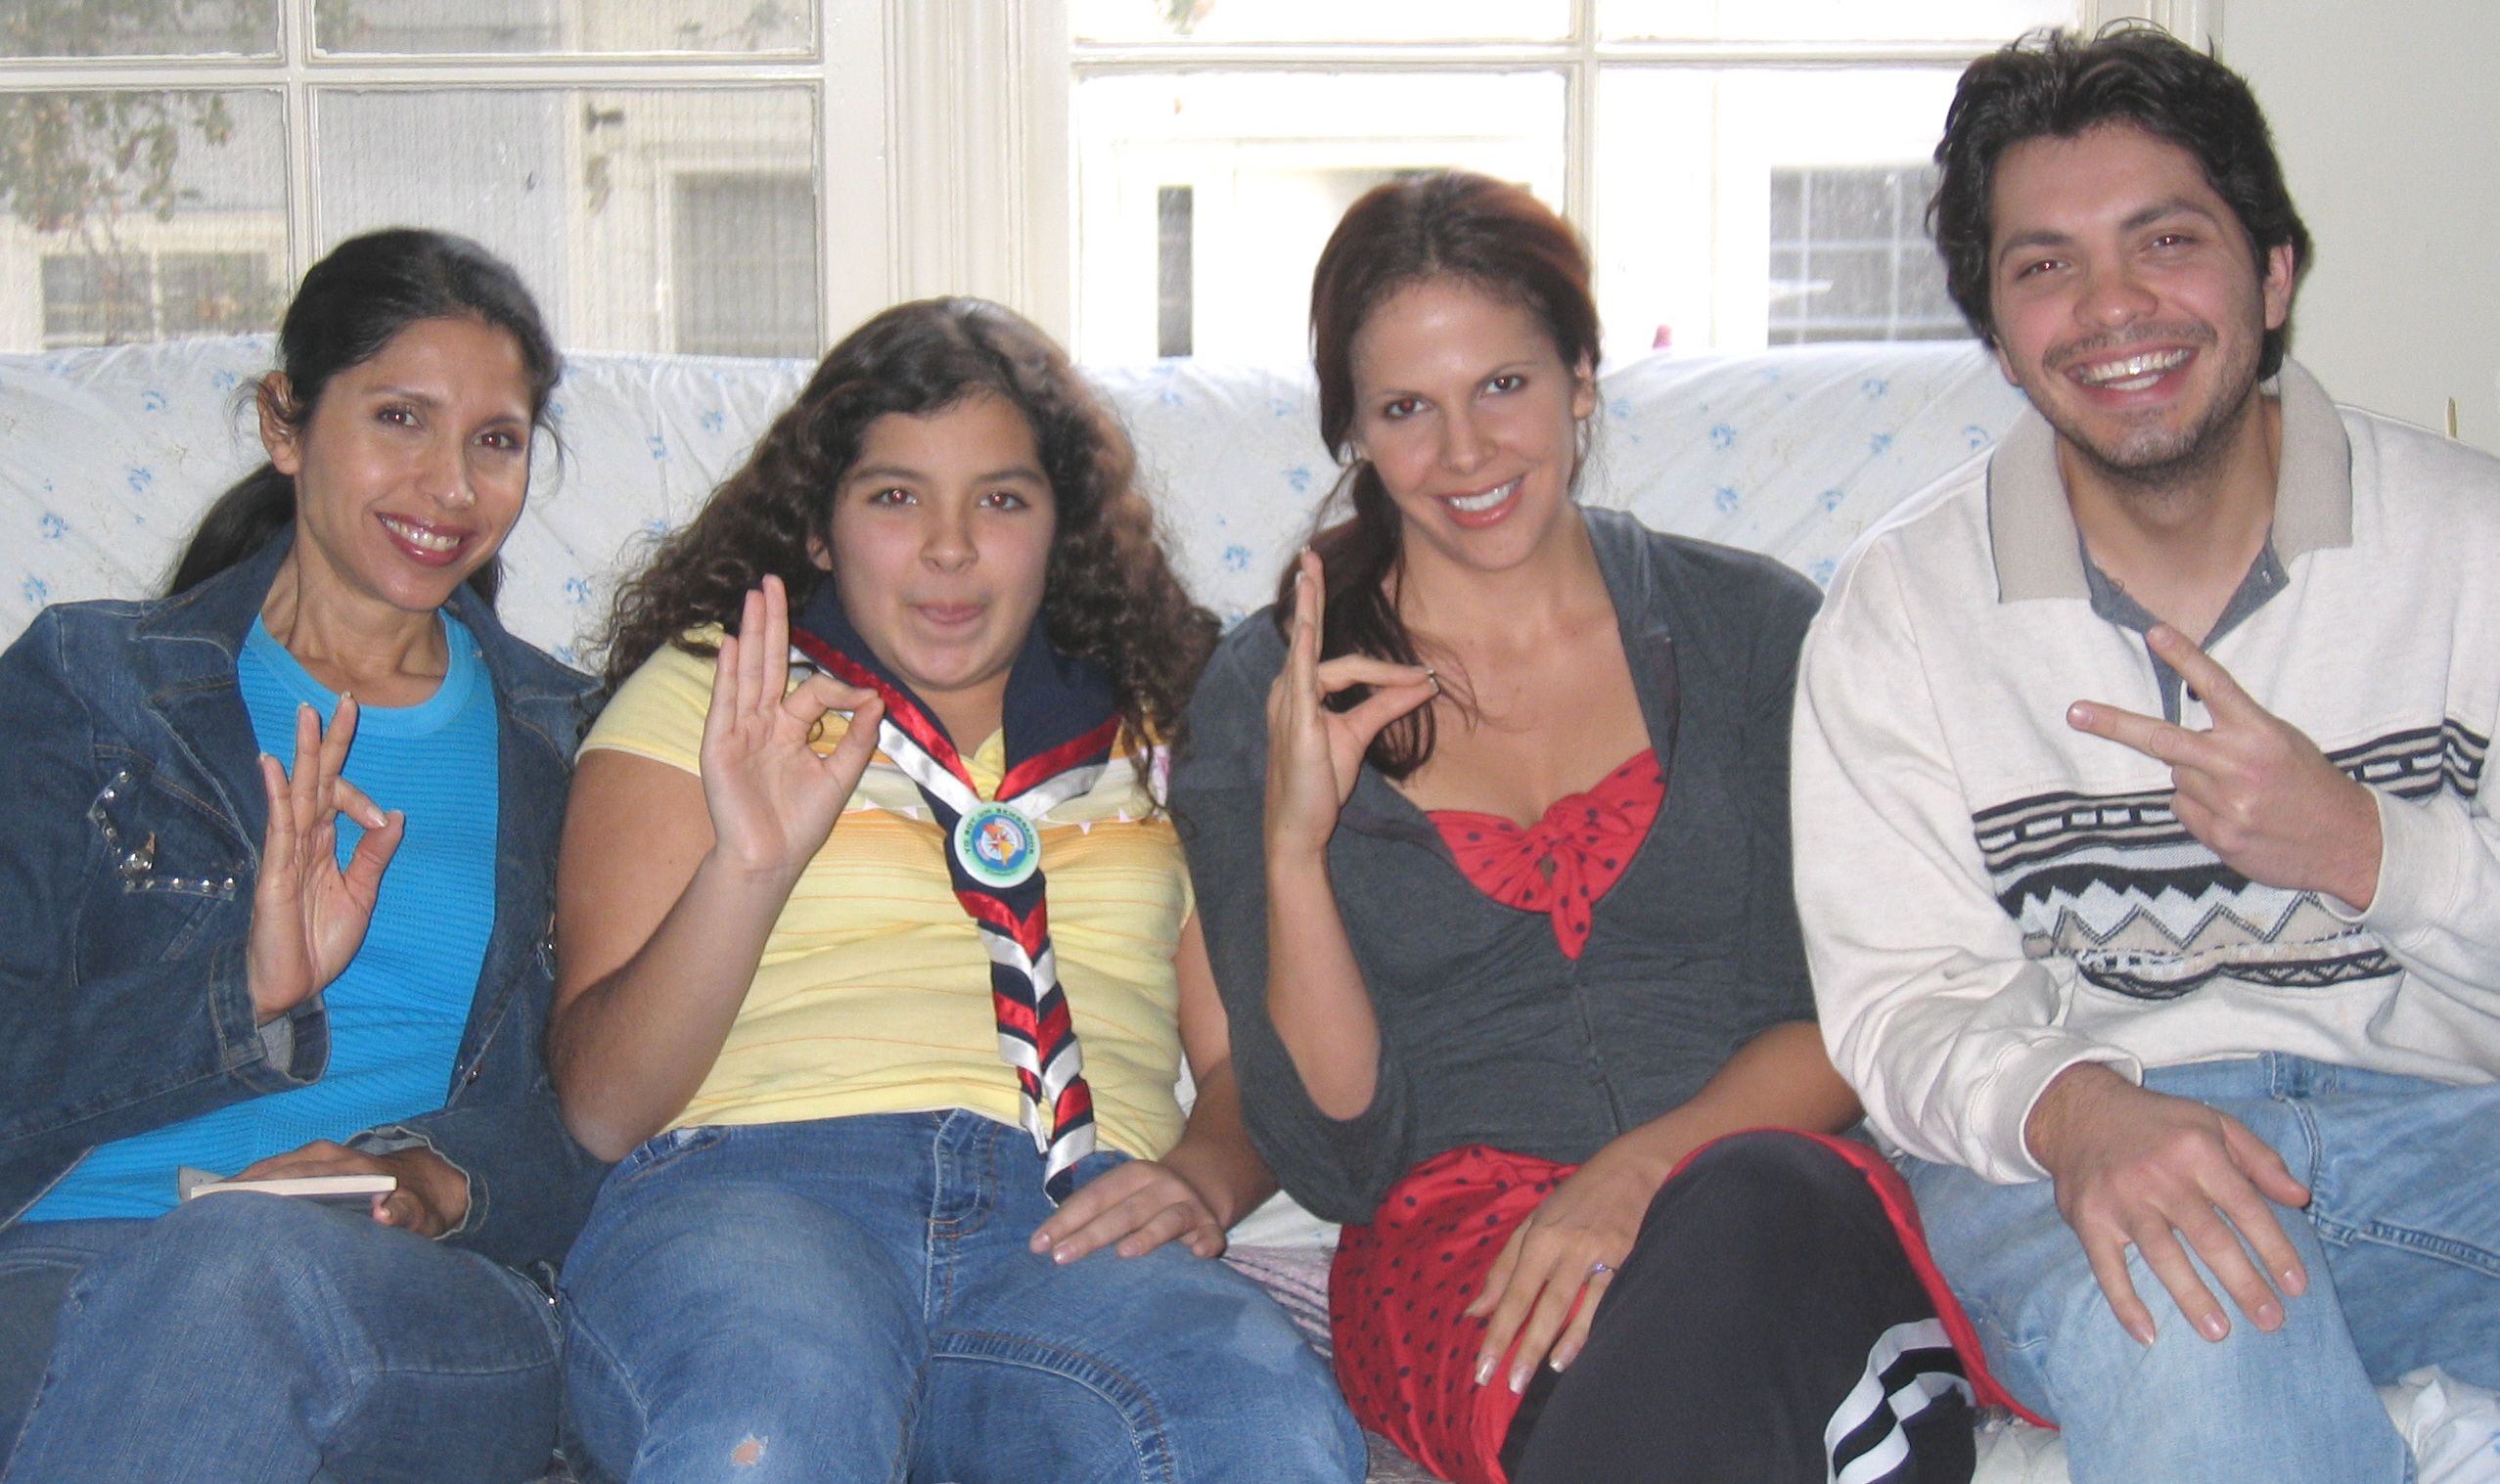 Alexa Gardner, Esteban Pena, Tasha Dixon and Susanna Velasquez on the set of 'And a Child Will Lead Them' Directed by Michael Booth